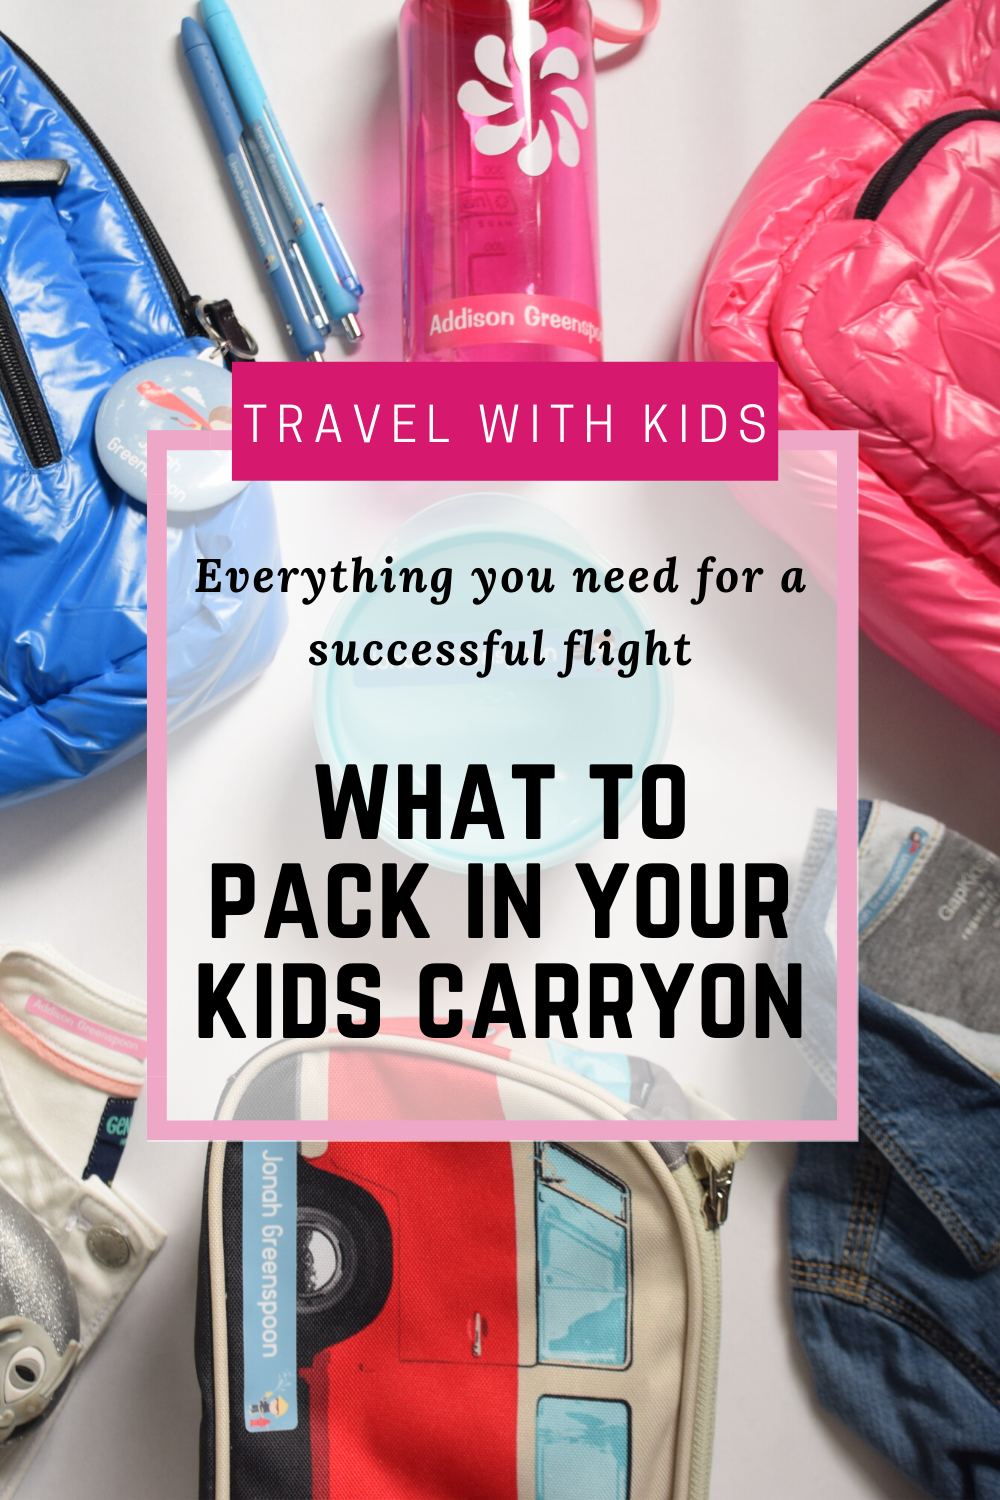 What to pack in your kids carryon